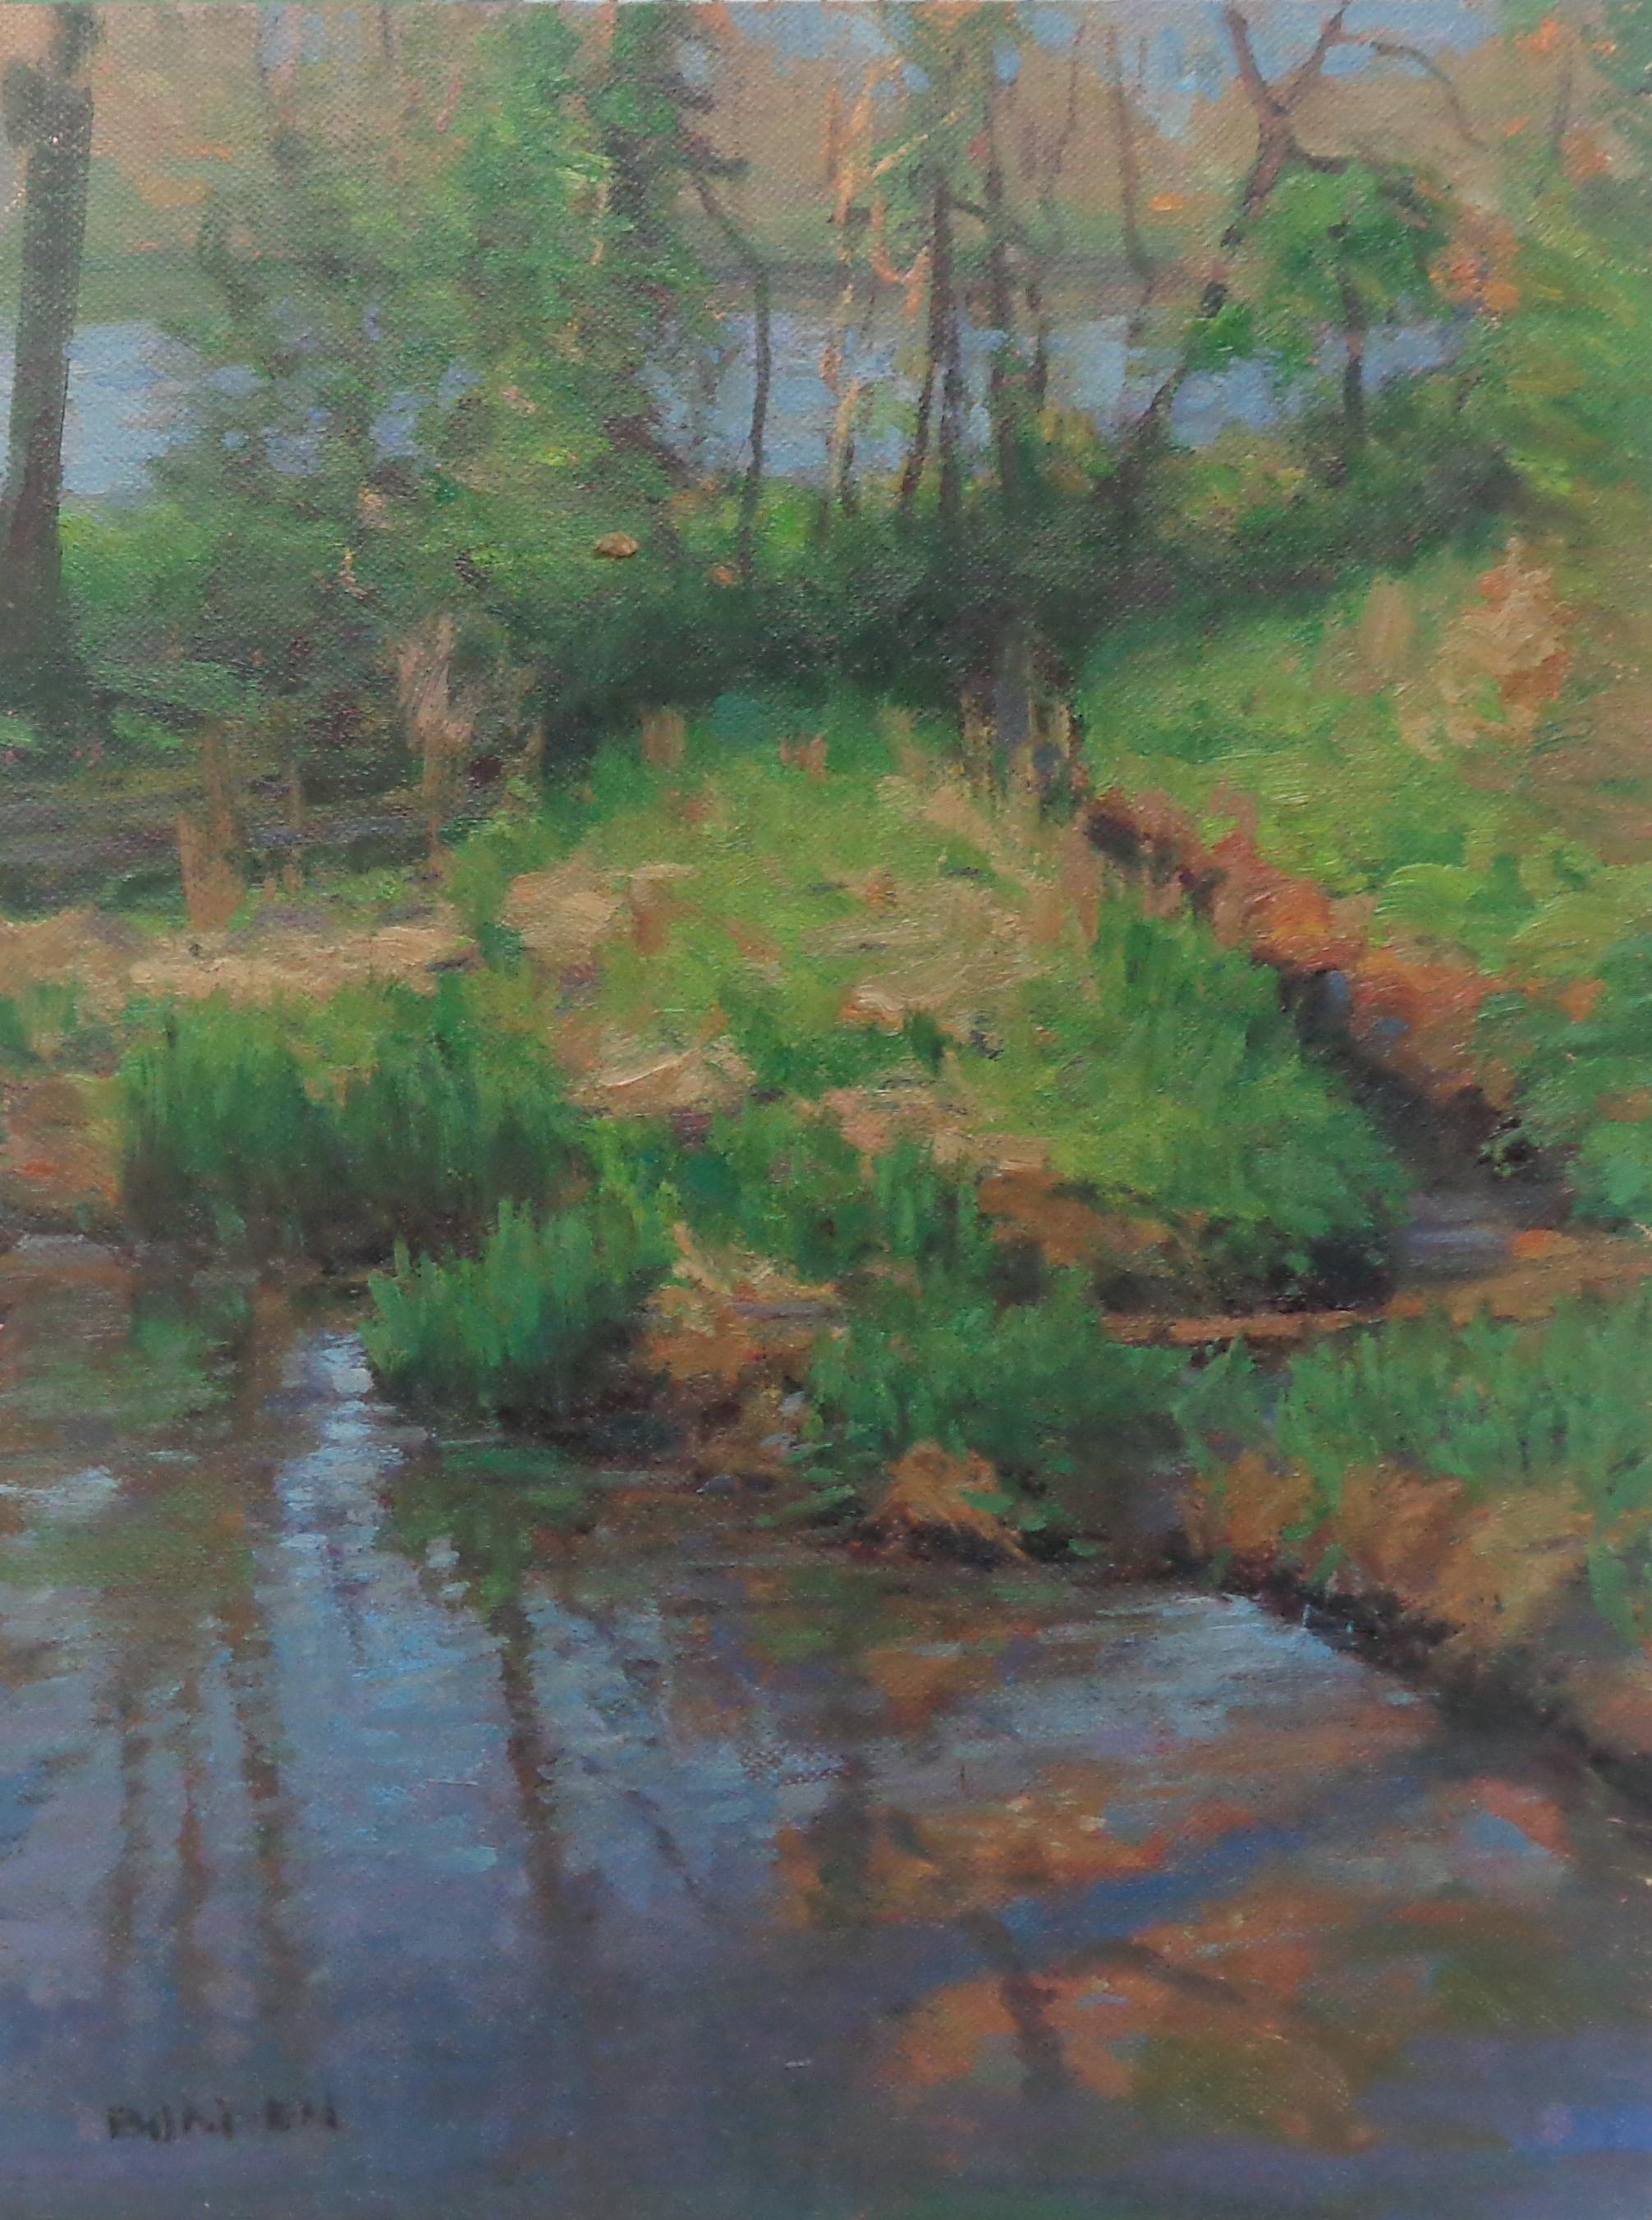 Spring Pond Study is a beautiful impressionistic plein air landscape oil painting that I did on location near my studio in 2020. The painting on a canvas panel and exudes the rich qualities of oil paint with bright strong color, a variety of lost